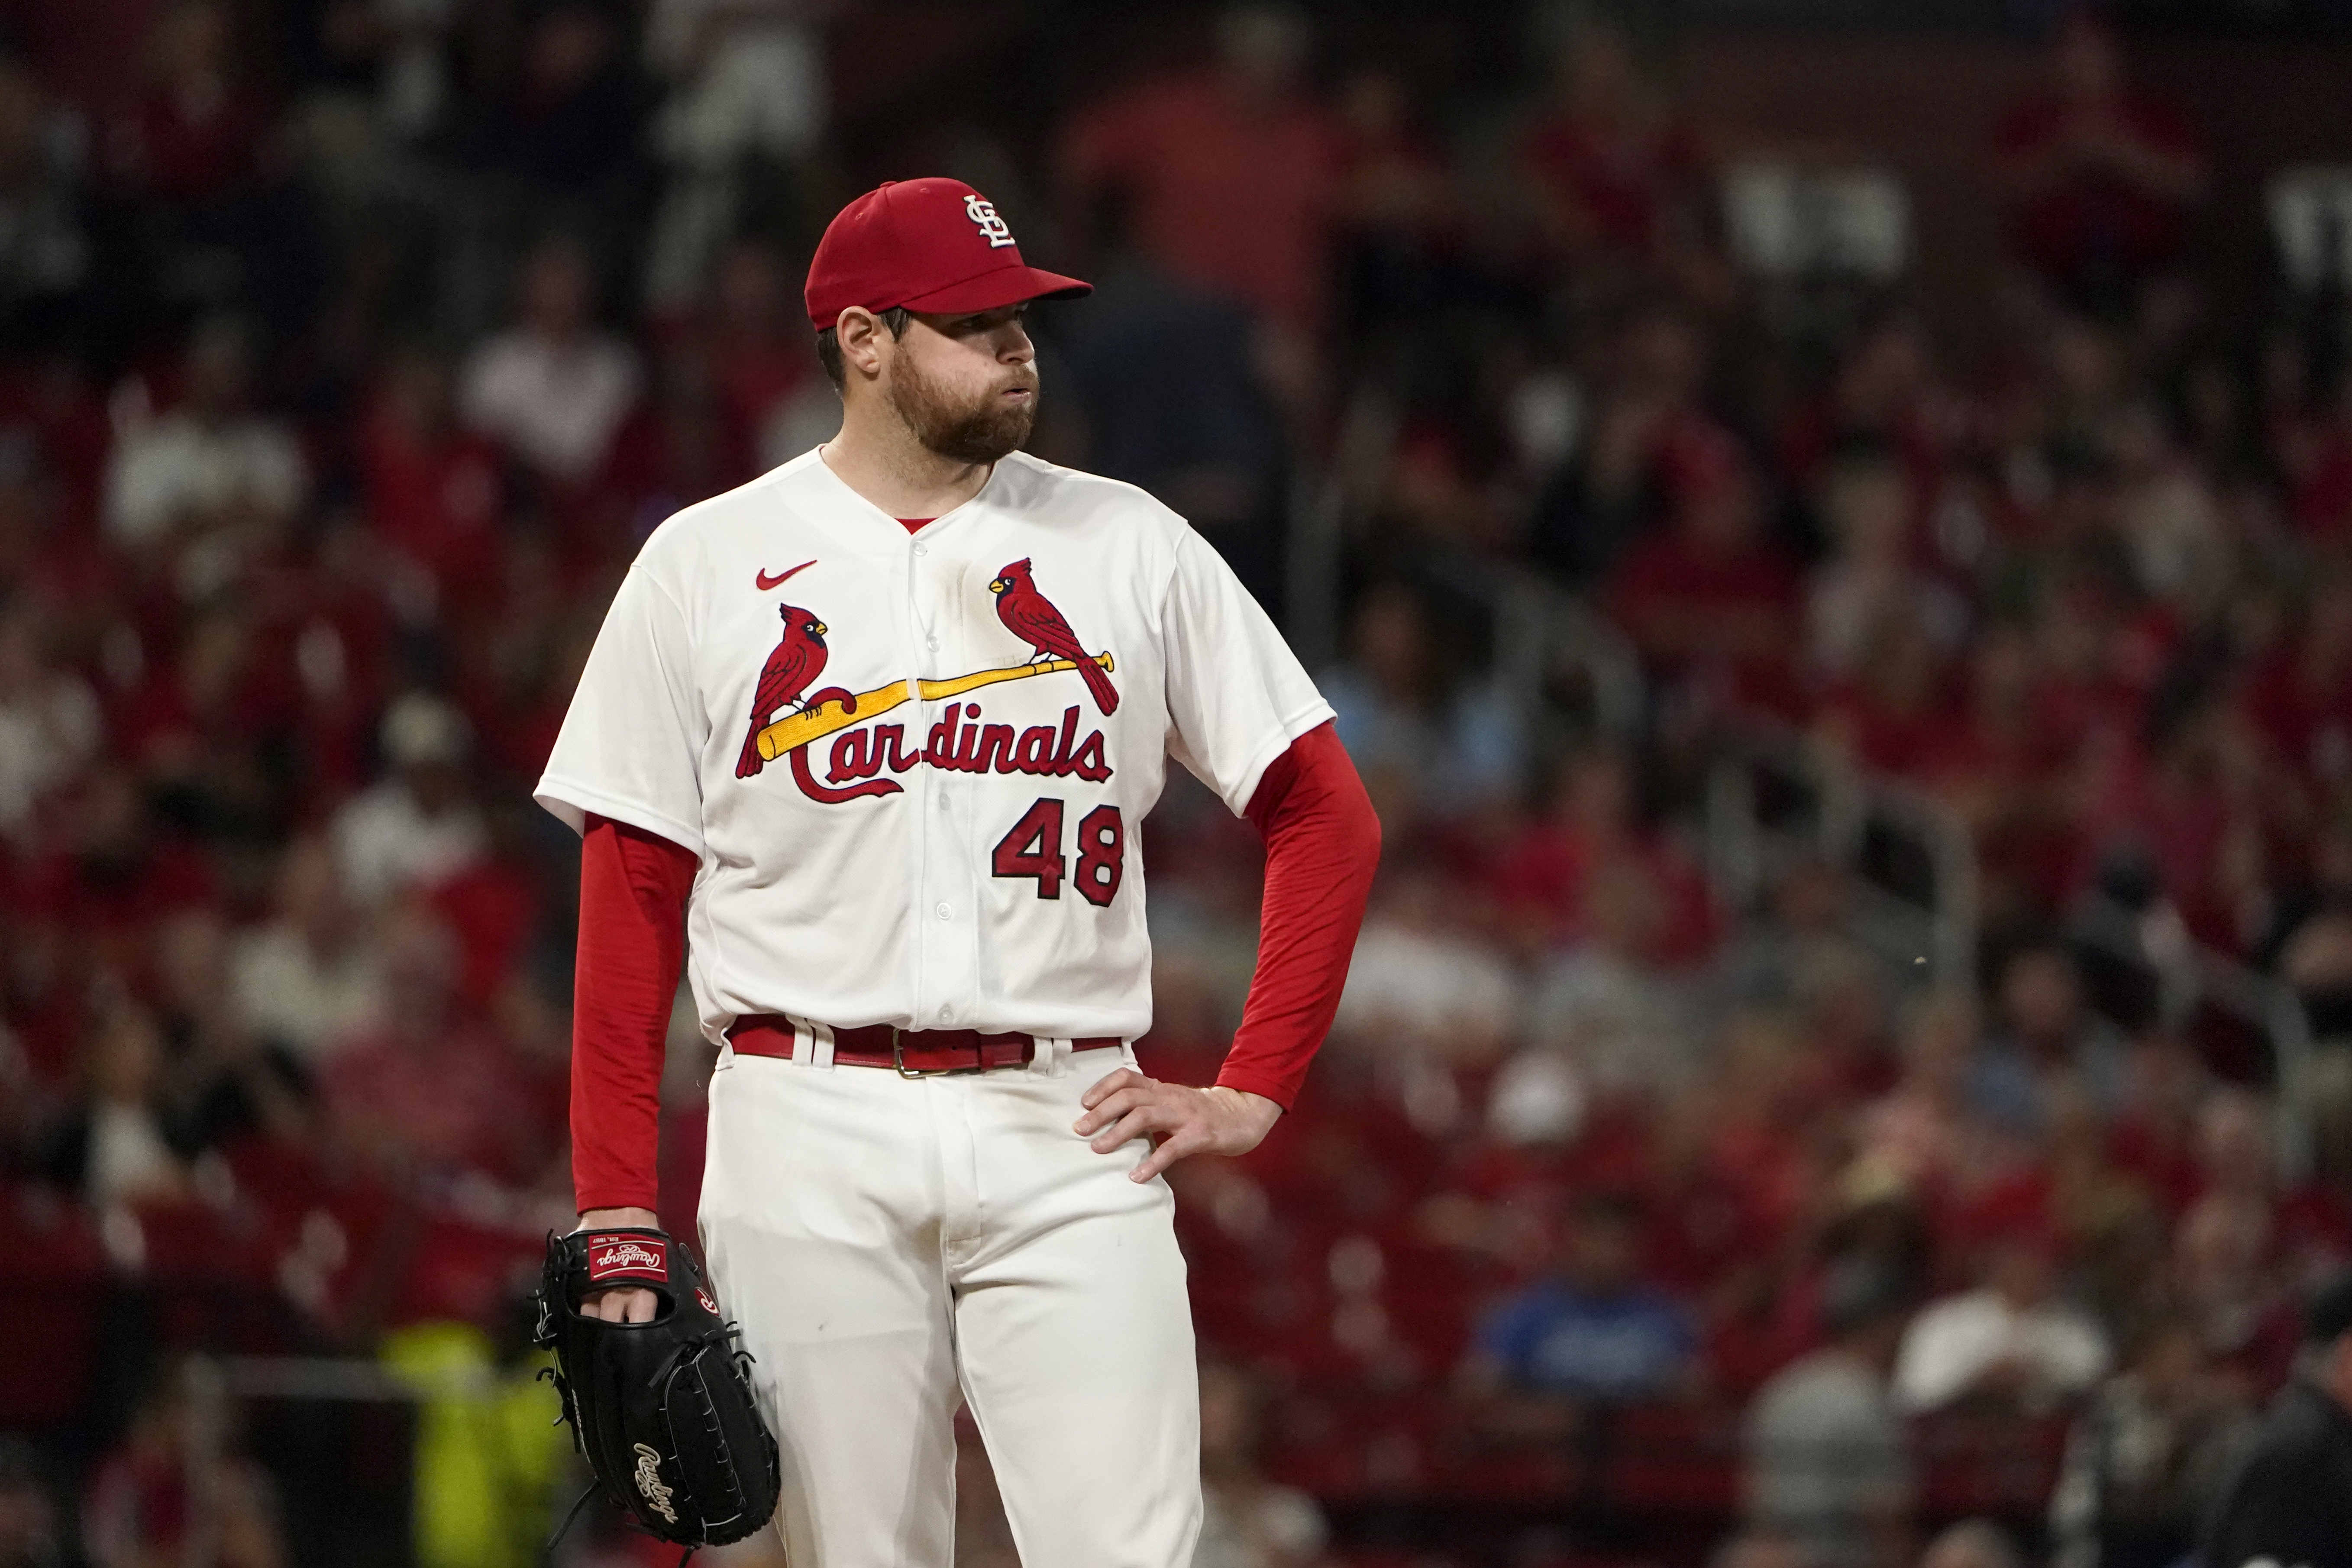 Jordan Montgomery may be pitching himself out of the Cardinals